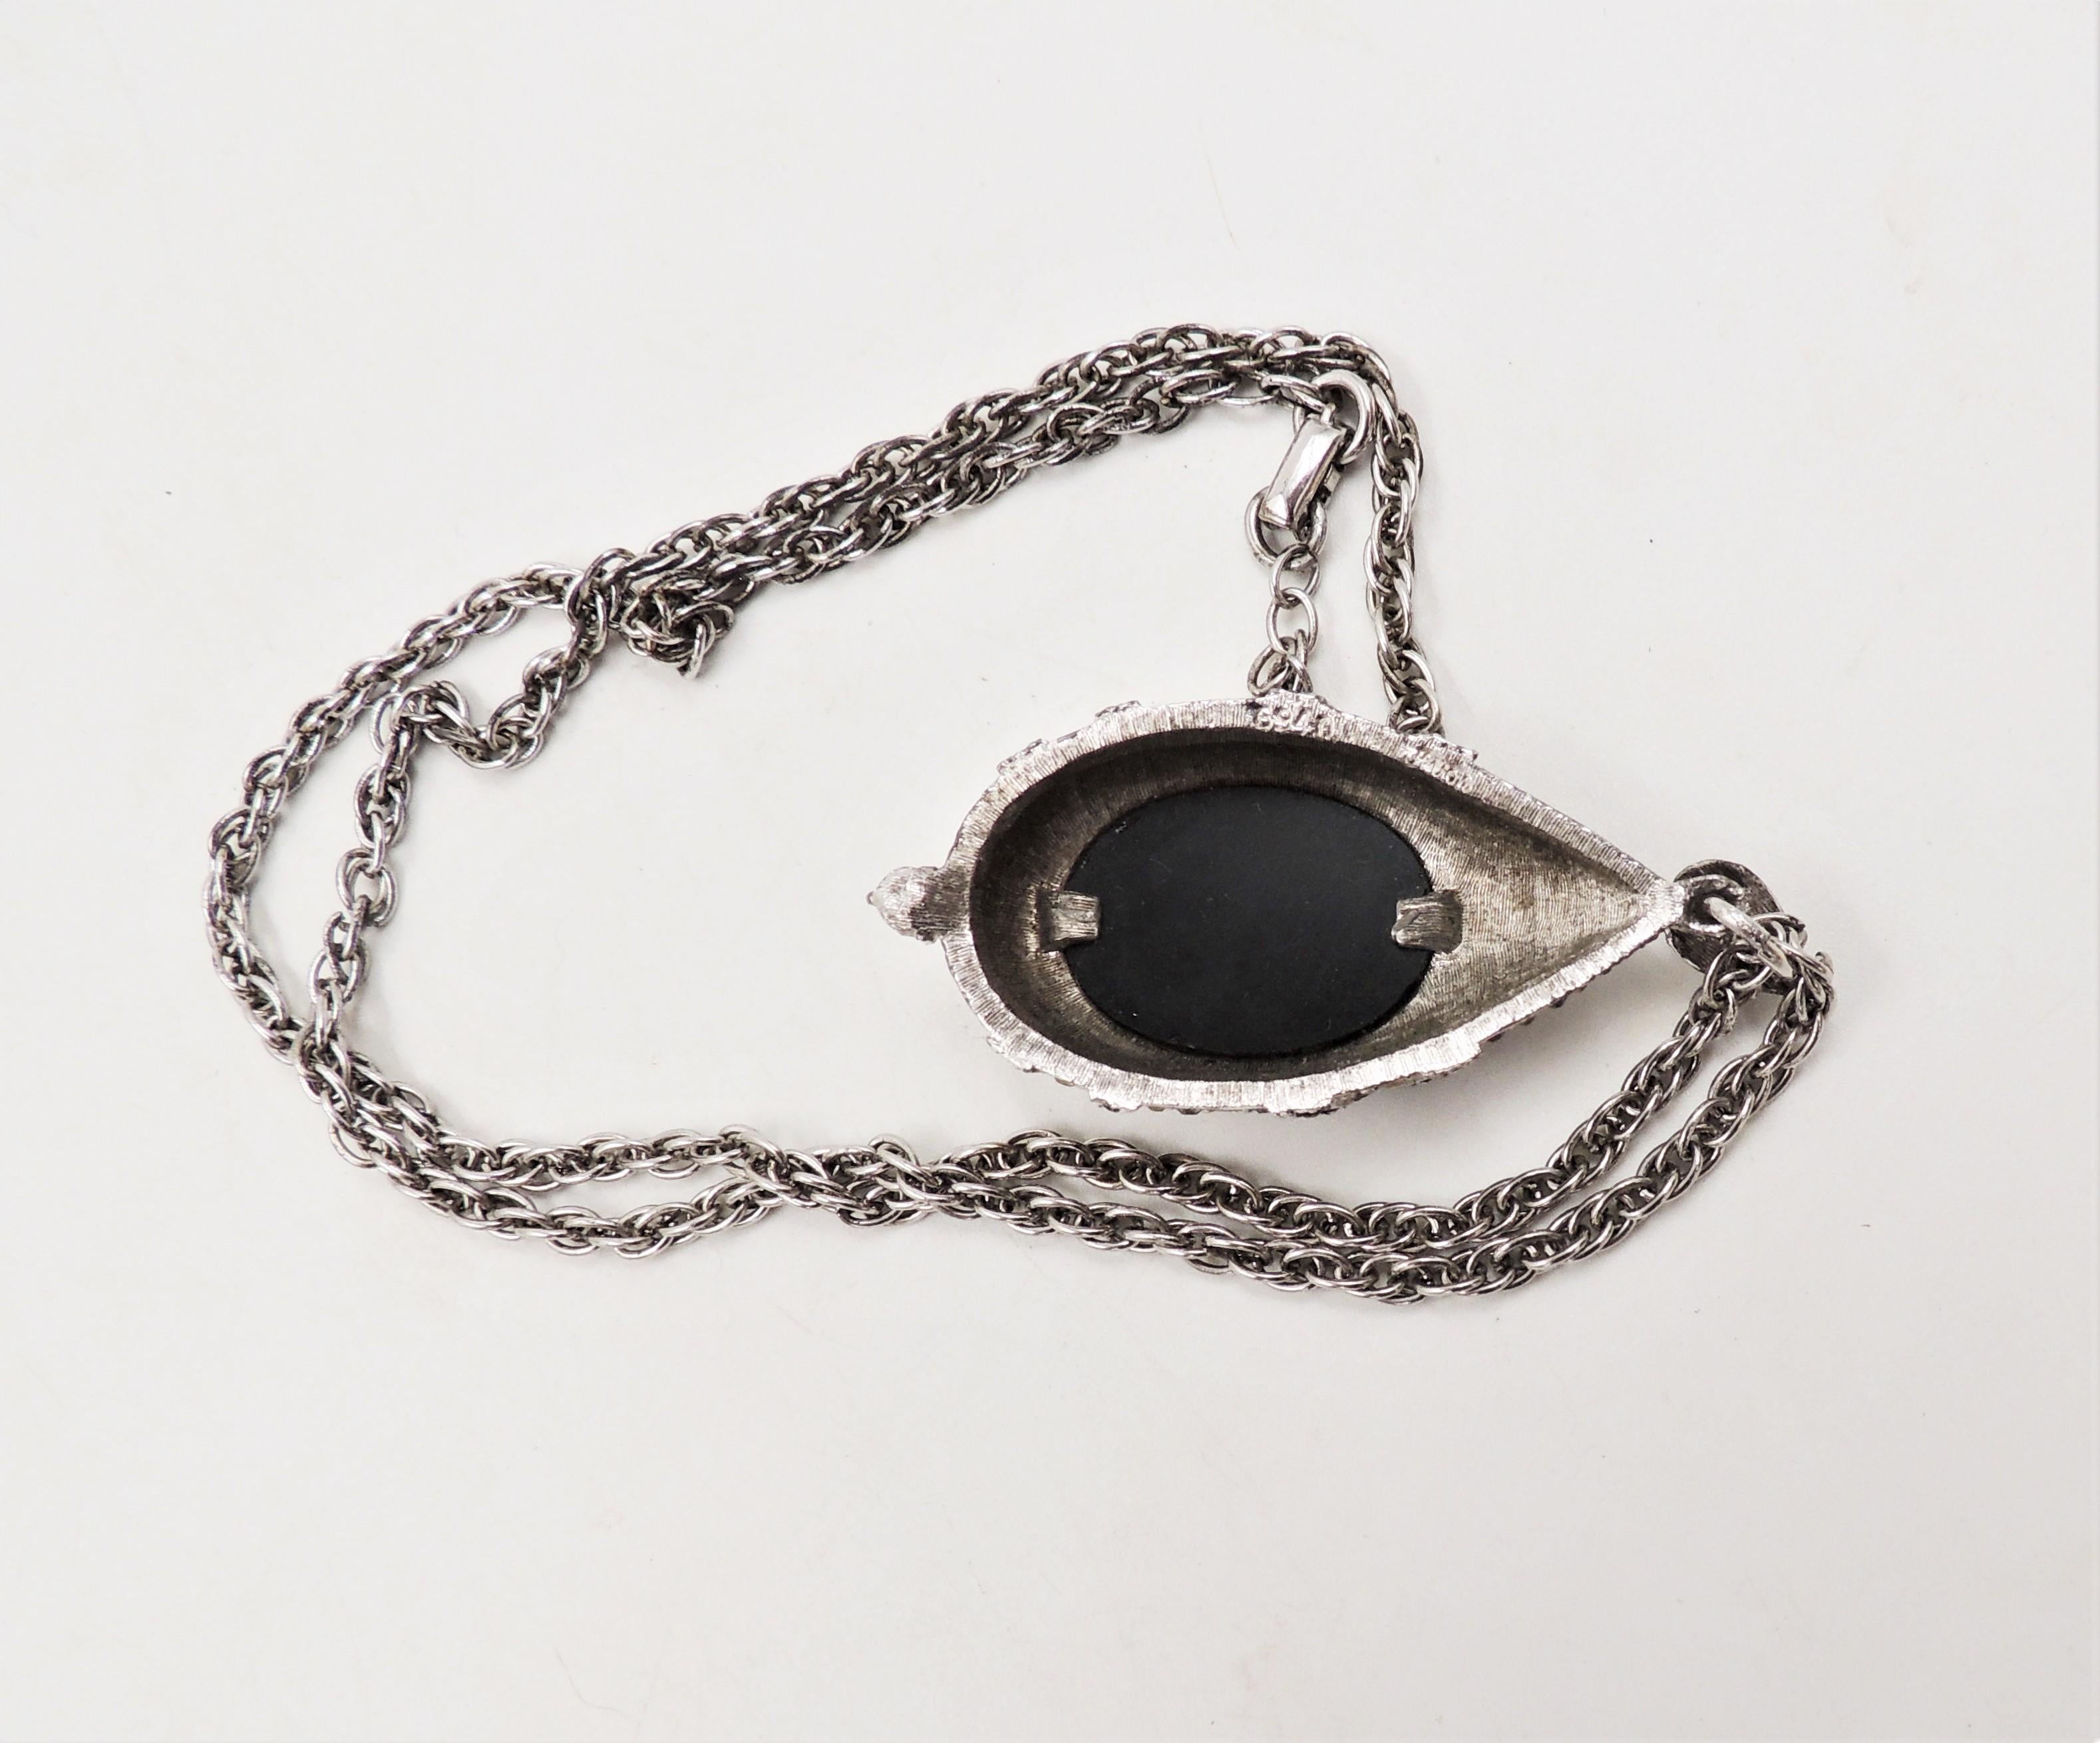 1960s brushed silvertone with cabochon faux-hematite with small faux-hematite and clear rhinestone accents pendant necklace with fold over clasp. Marked 